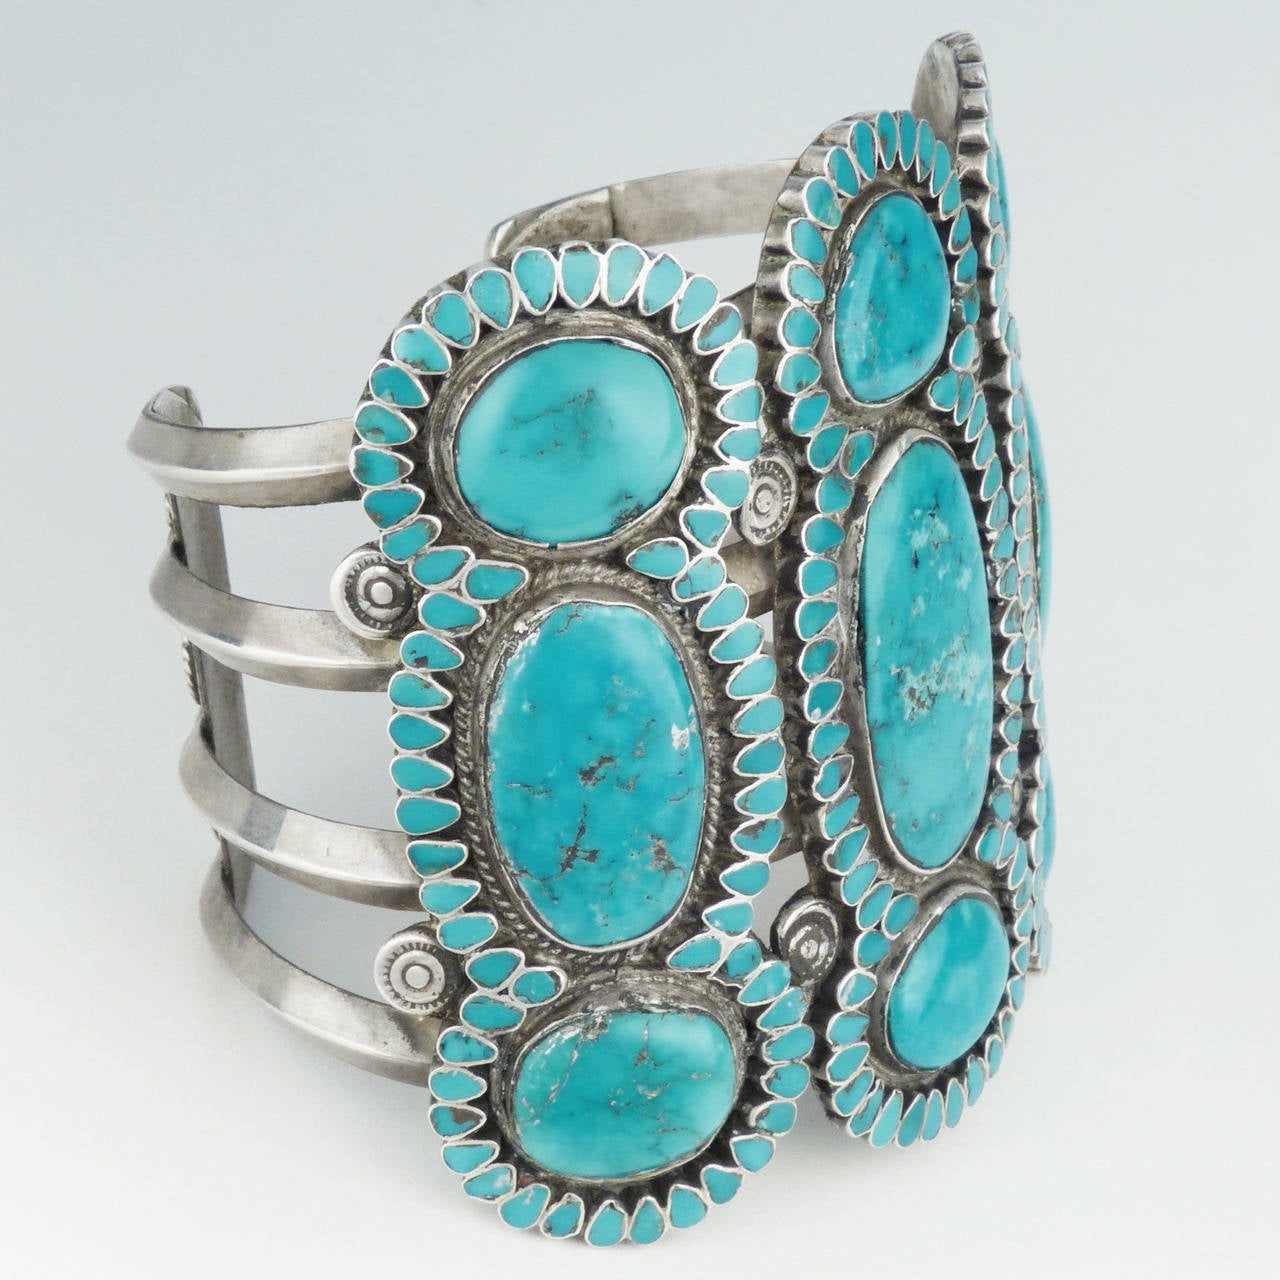 A fantastic example of Frank Dishta’s work, c. 1950. Dishta worked primarily in channel inlay and made jewelry for C.G. Wallace, the trader at Zuni. This bracelet features over 200 individual teardrop shaped stones juxtaposed against extremely large